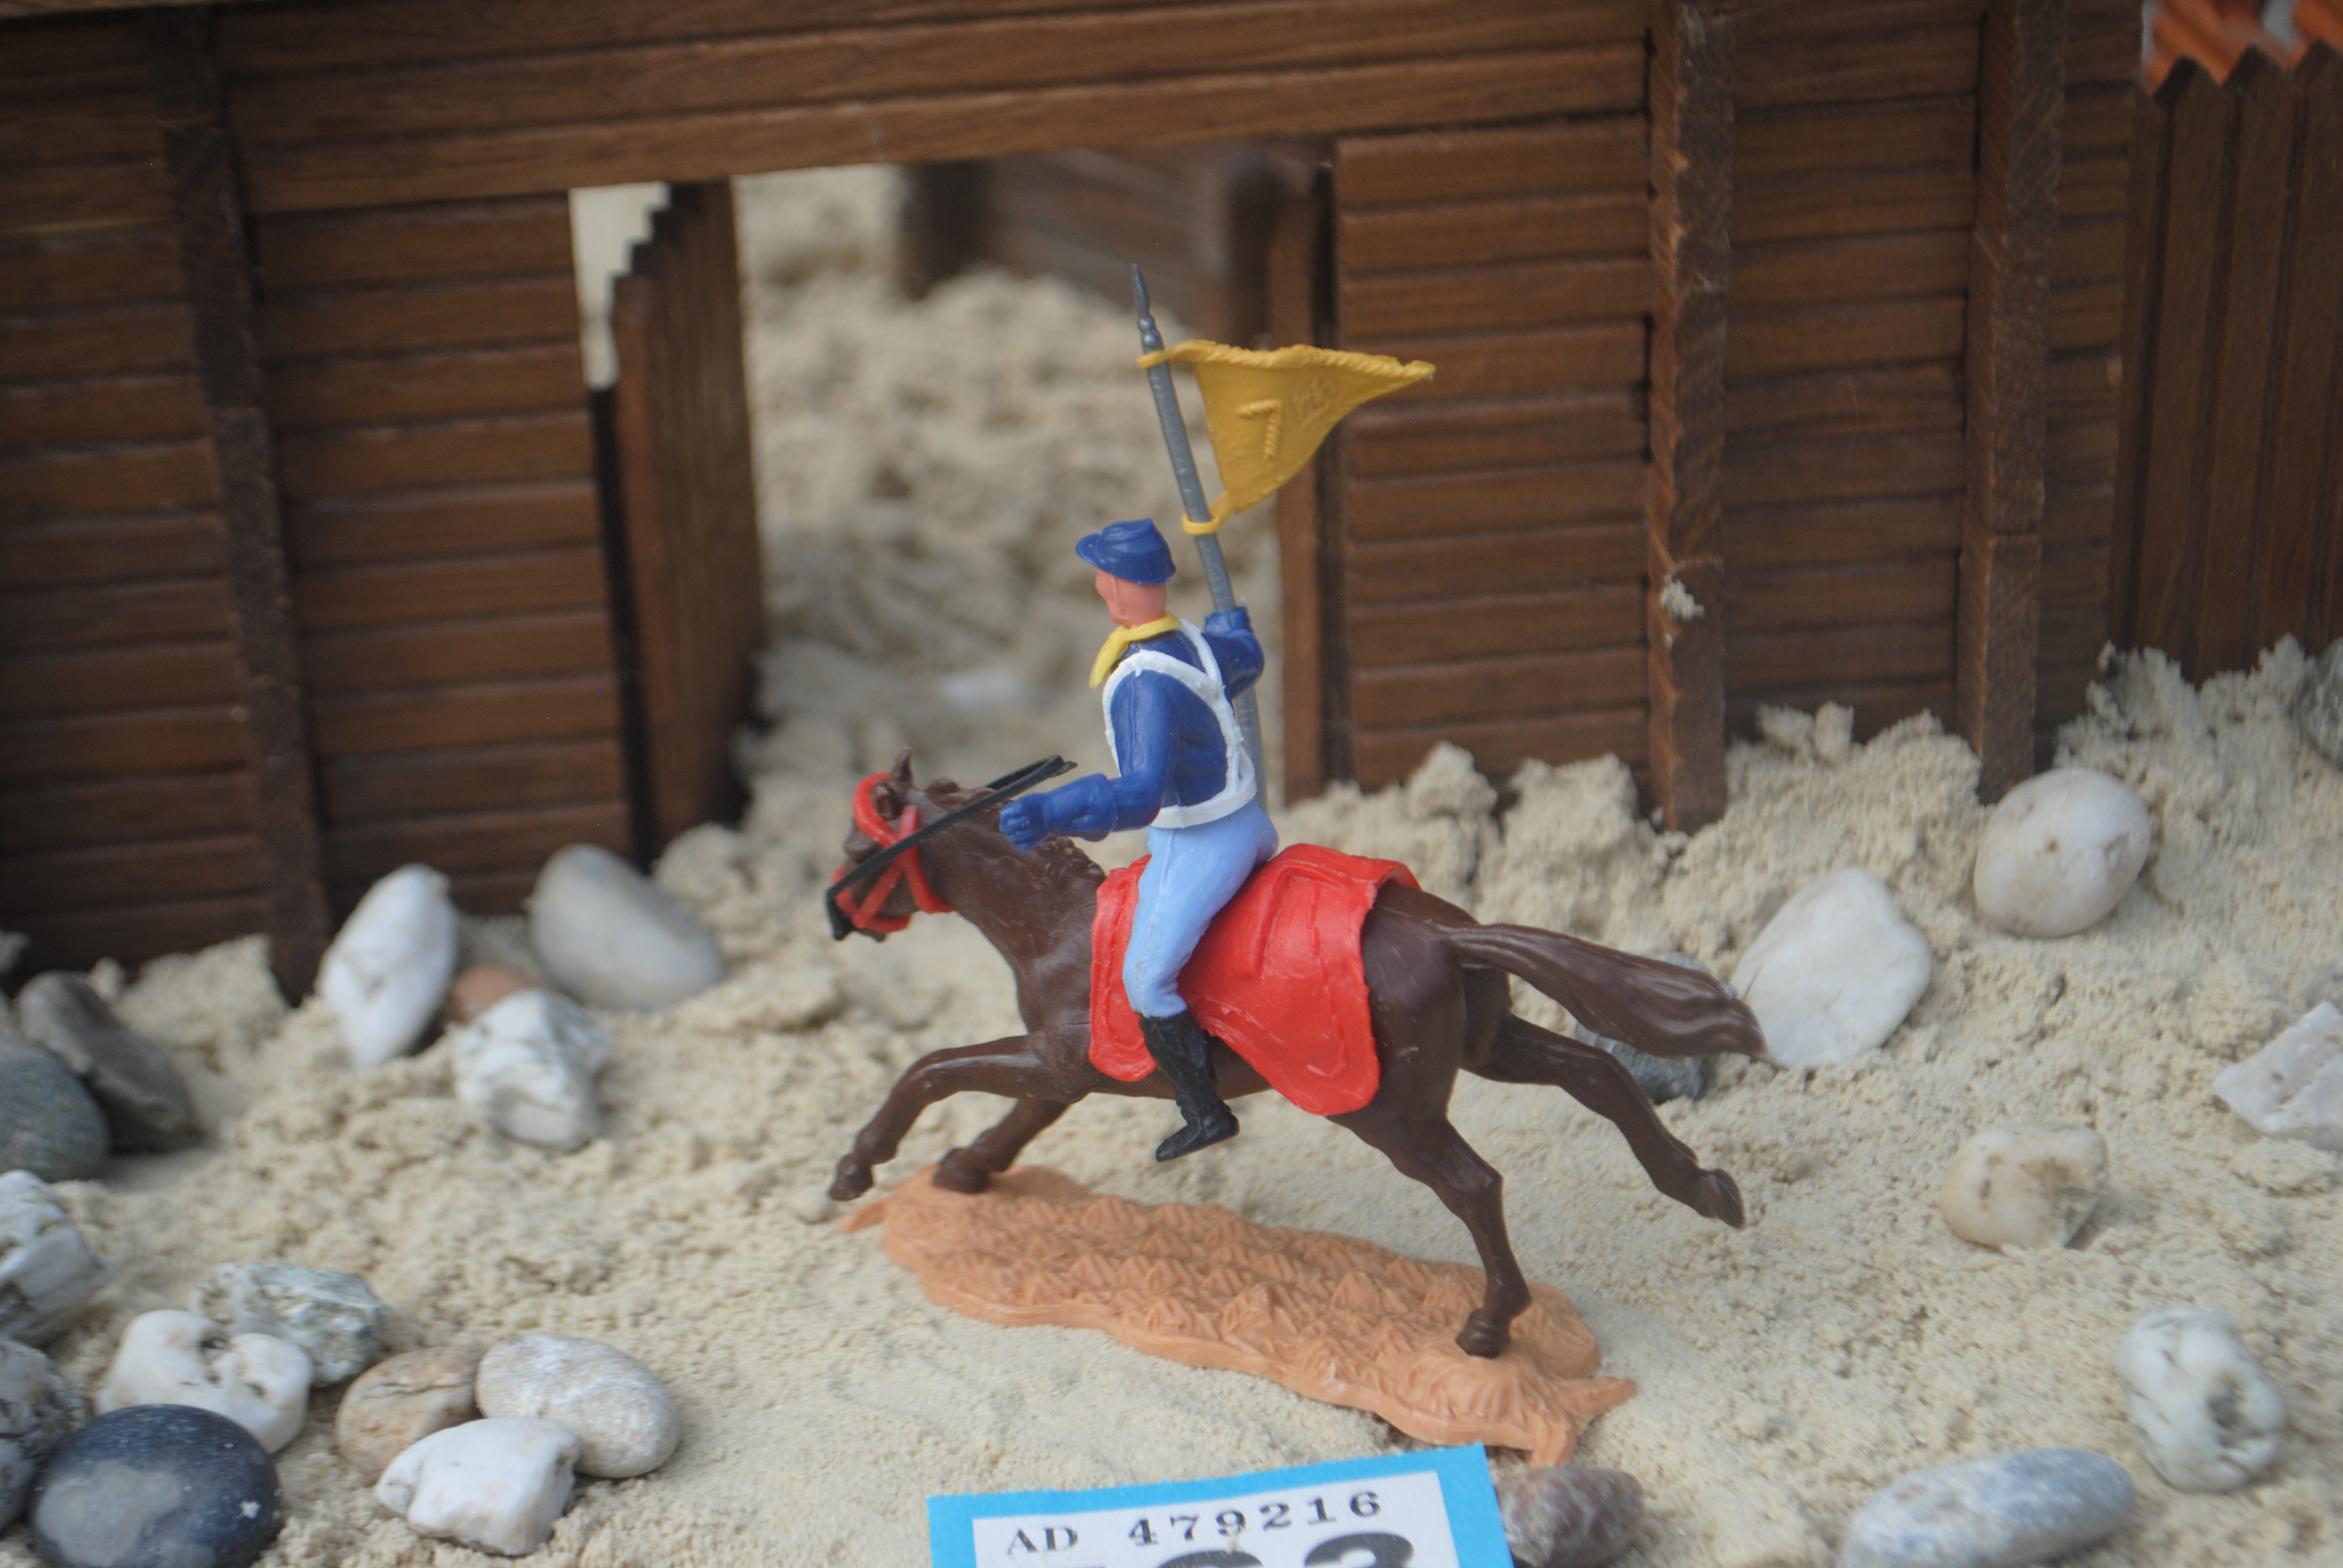 Timpo Toys B.563 Union Army Soldier riding American Civil War / US 7th Cavalry 2nd version 